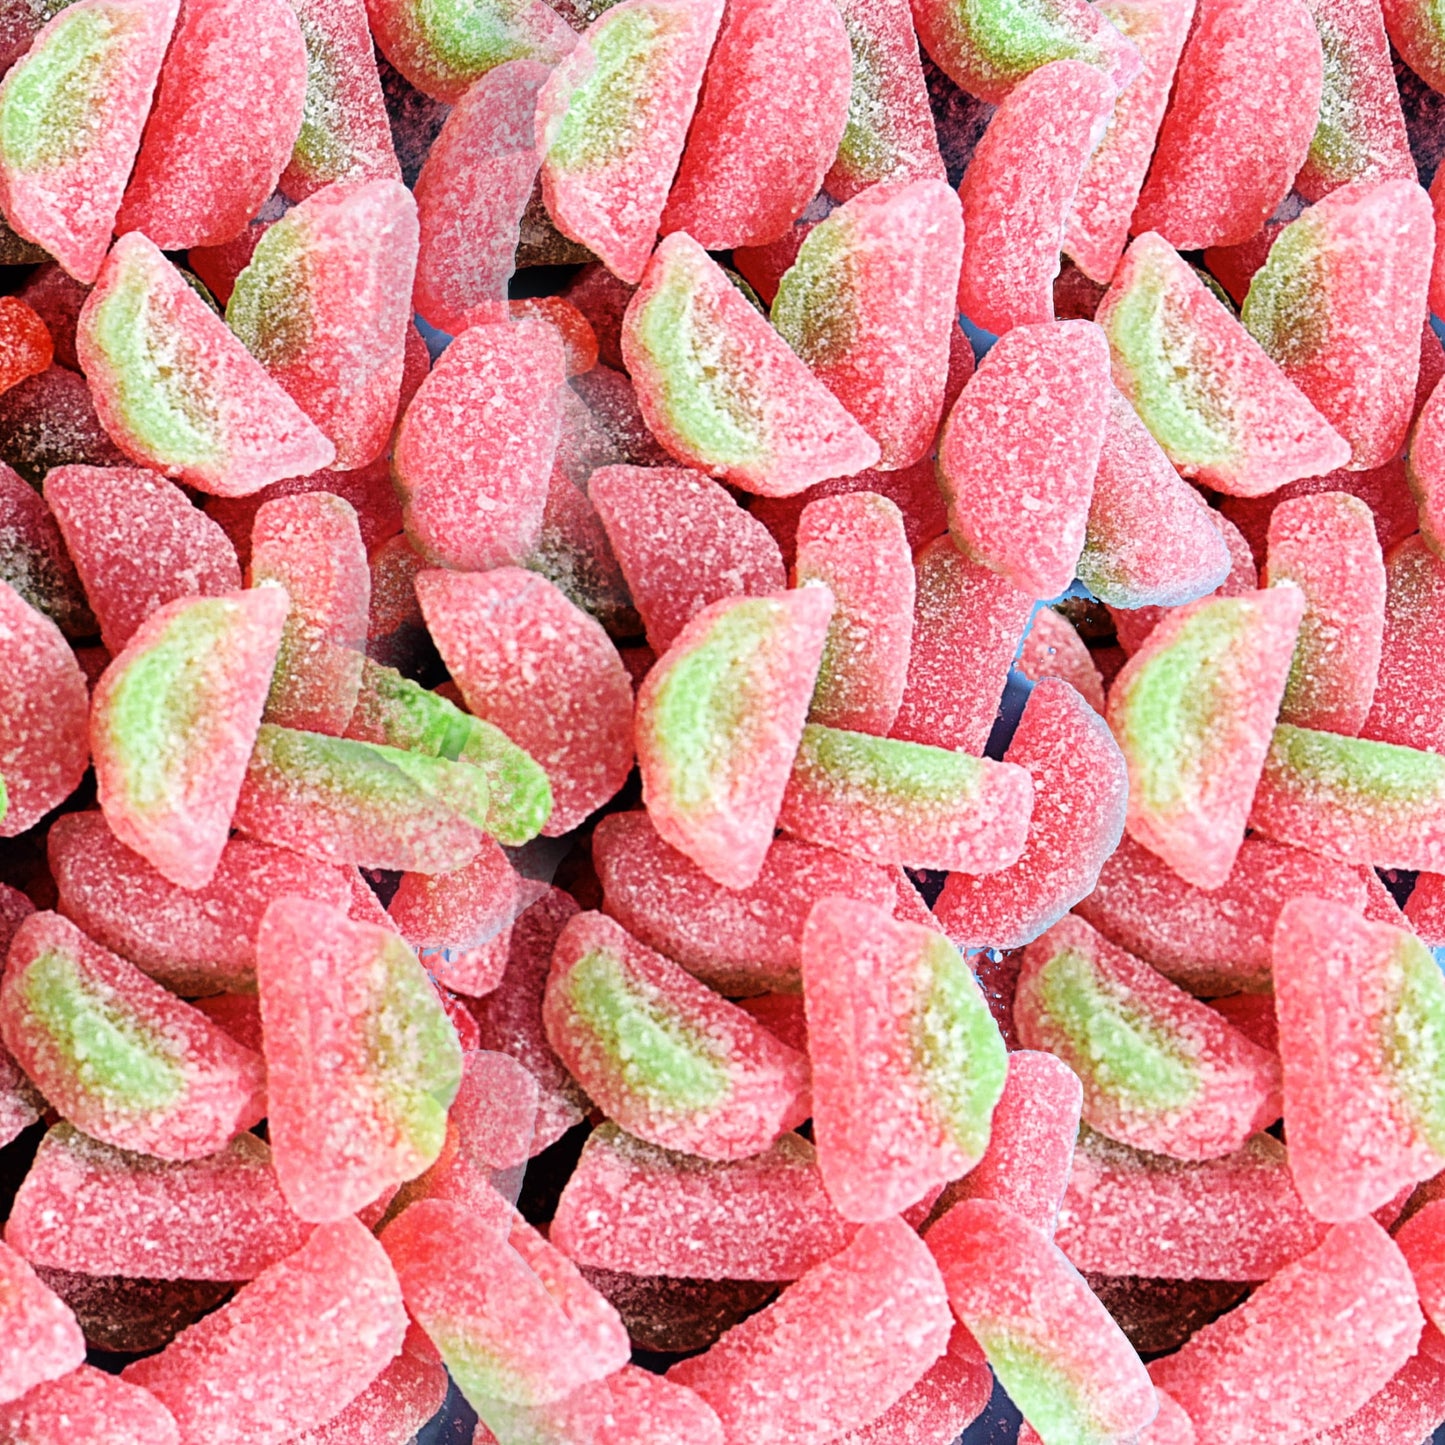 Watermelon Soft & Chewy Candy, Family Size, 1.8 Lb Bag